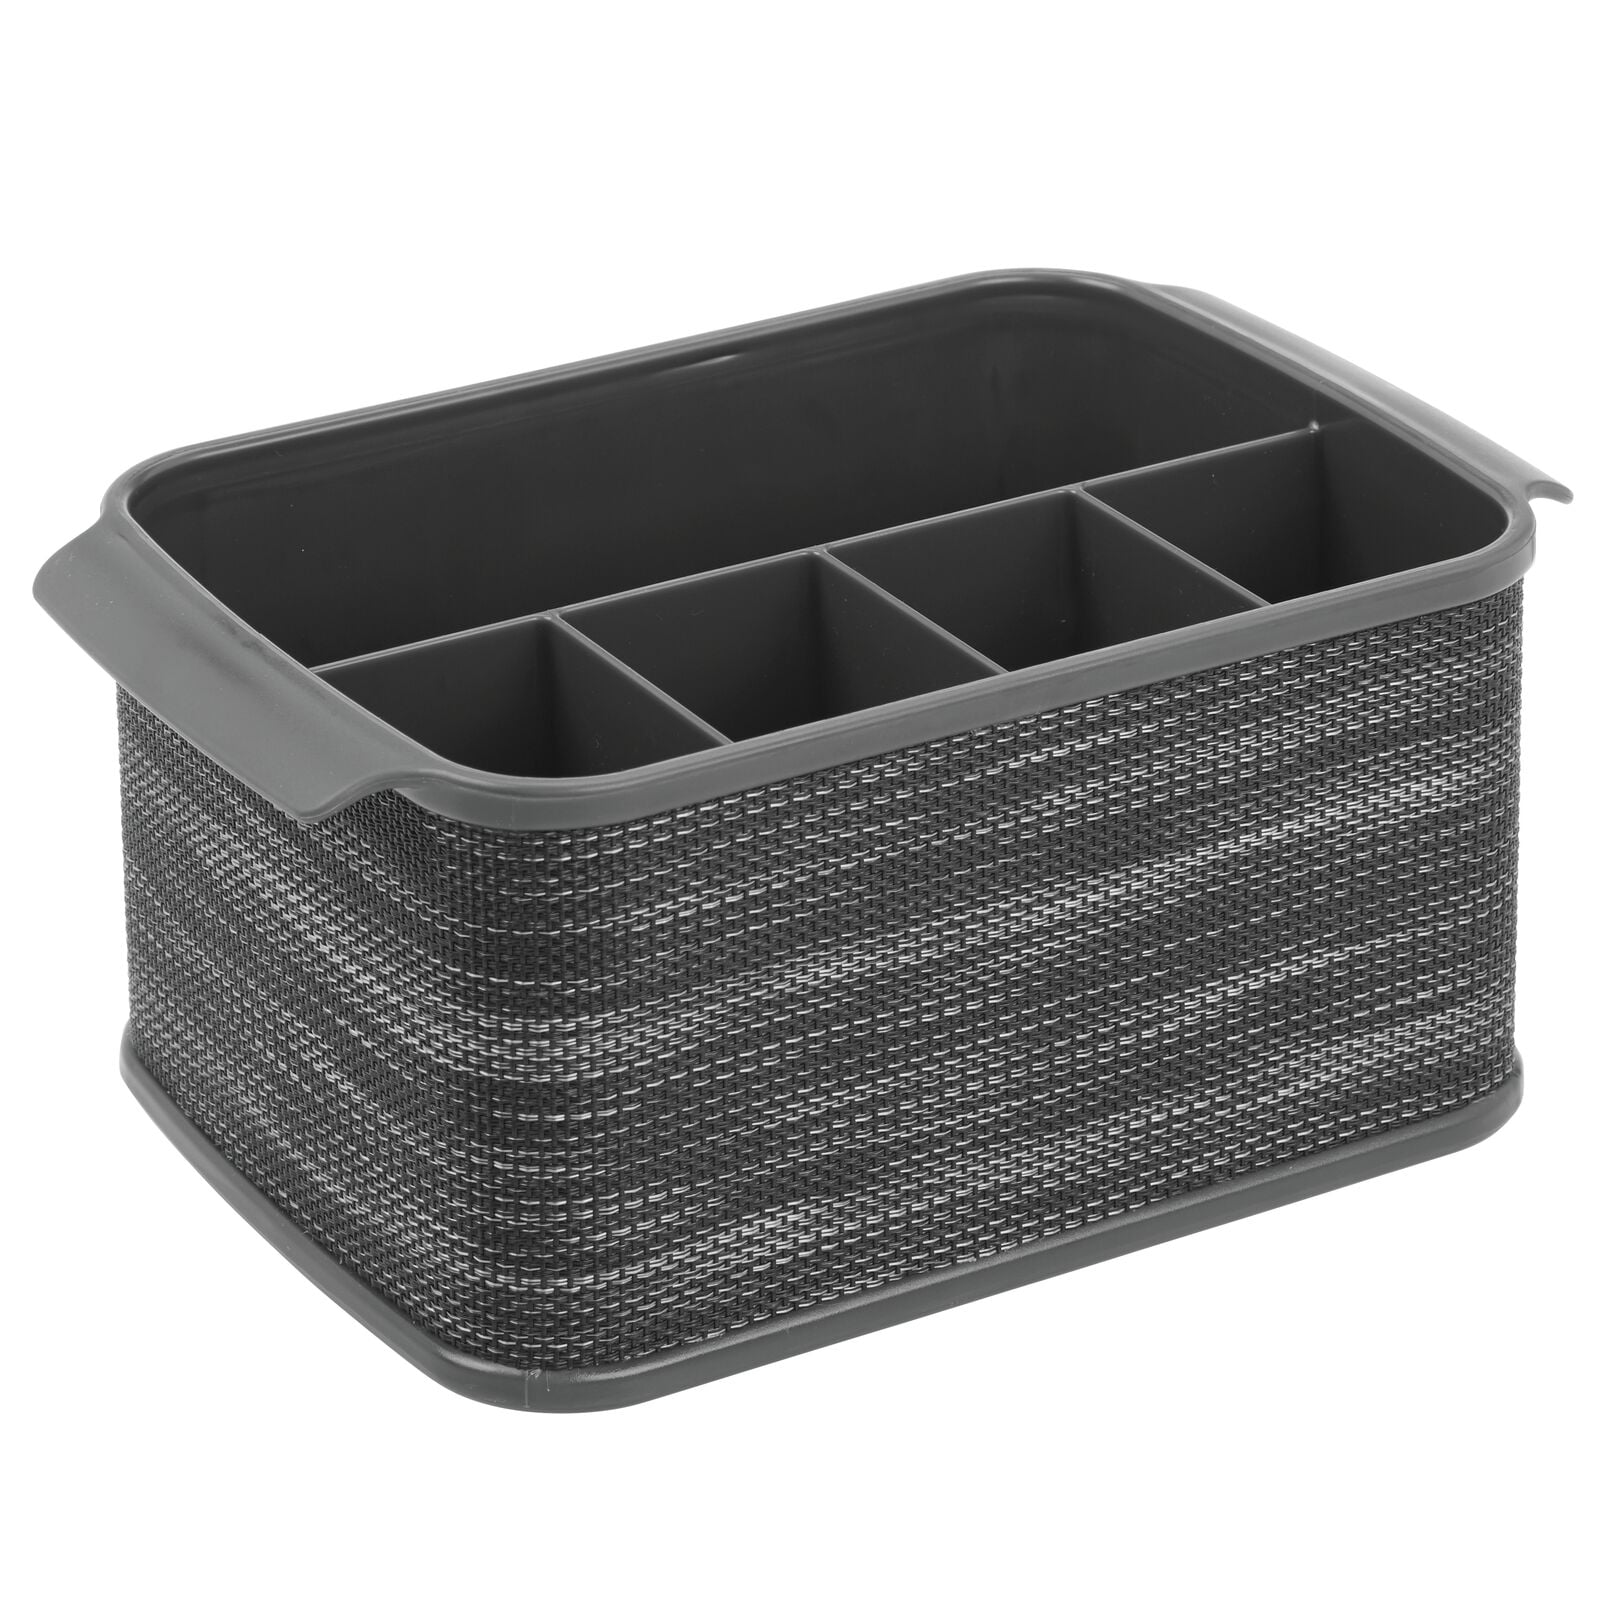 Basket Organizer for Forks Black mDesign Plastic Cutlery Storage Organizer Caddy Bin Napkins Kitchen Cabinet or Pantry Tote with Handle Indoor or Outdoor Use Spoons Knives 